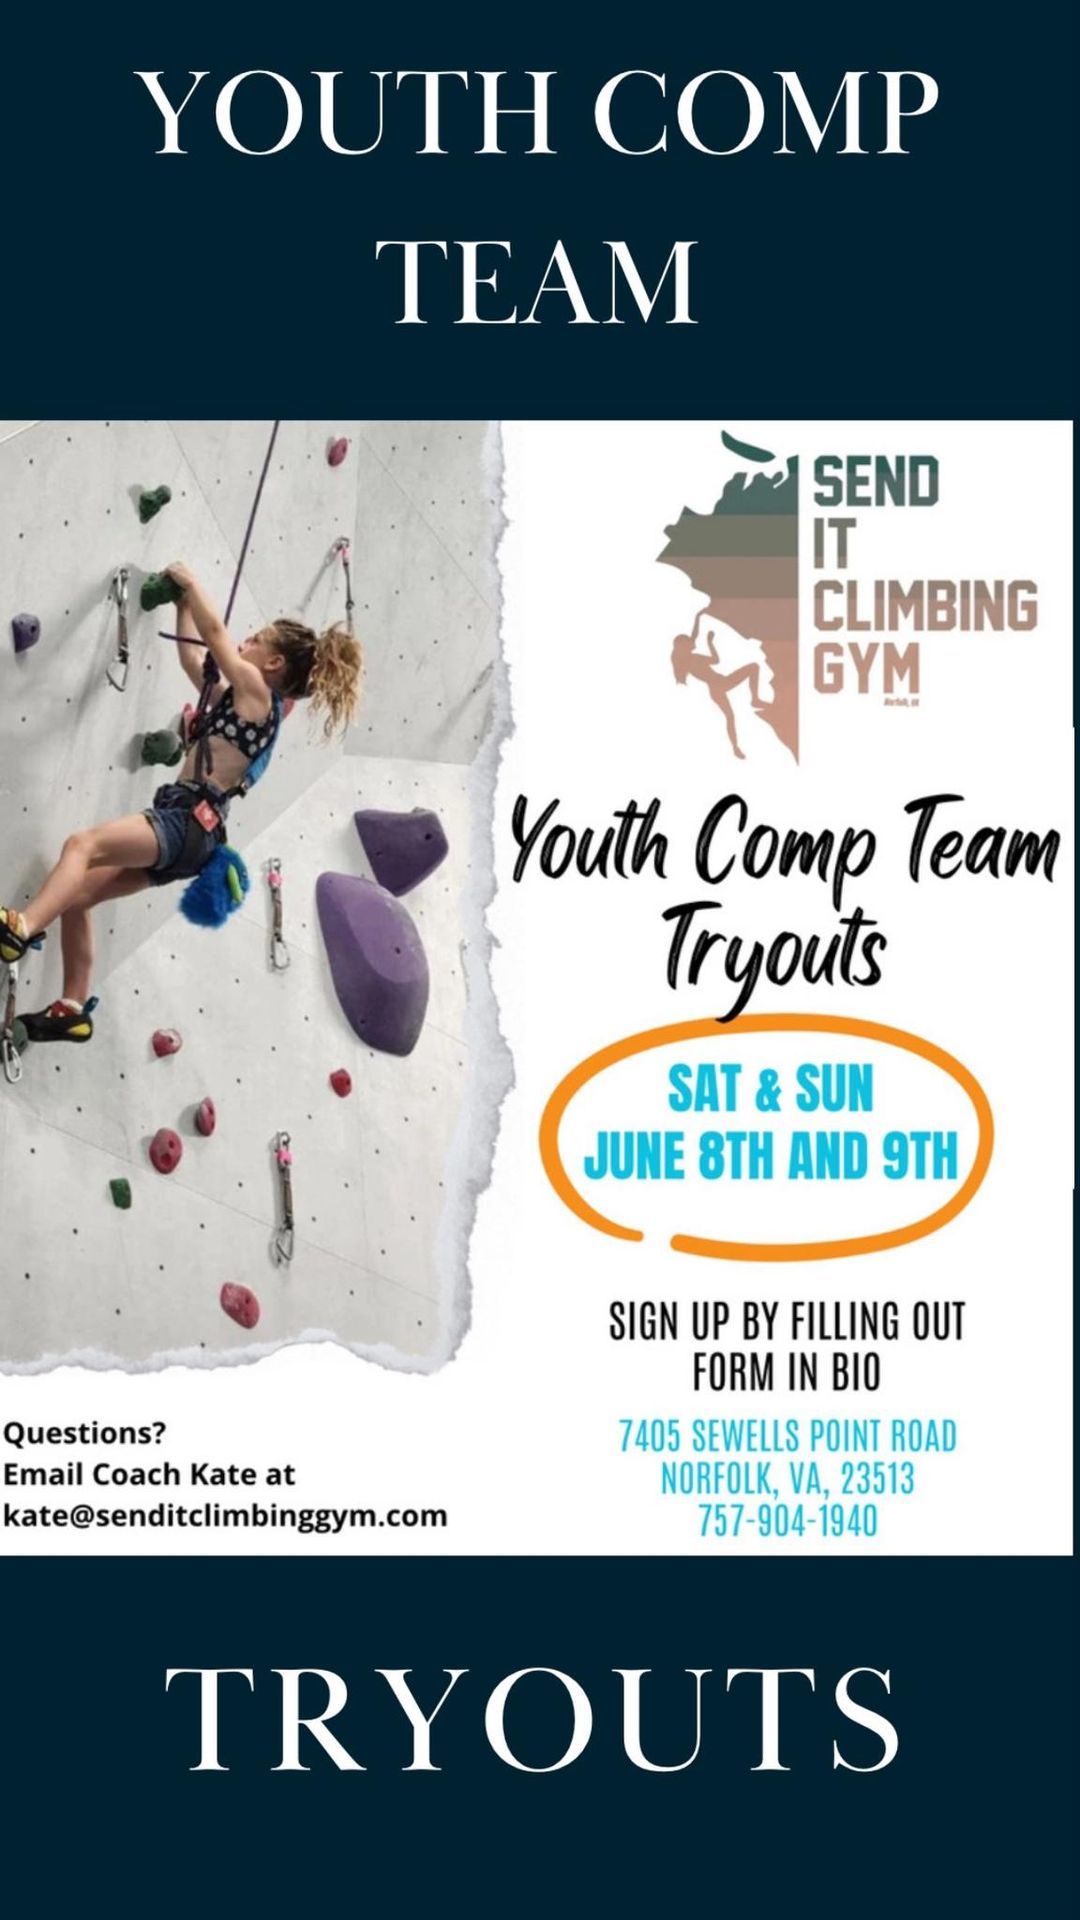 Youth Comp Team Tryouts